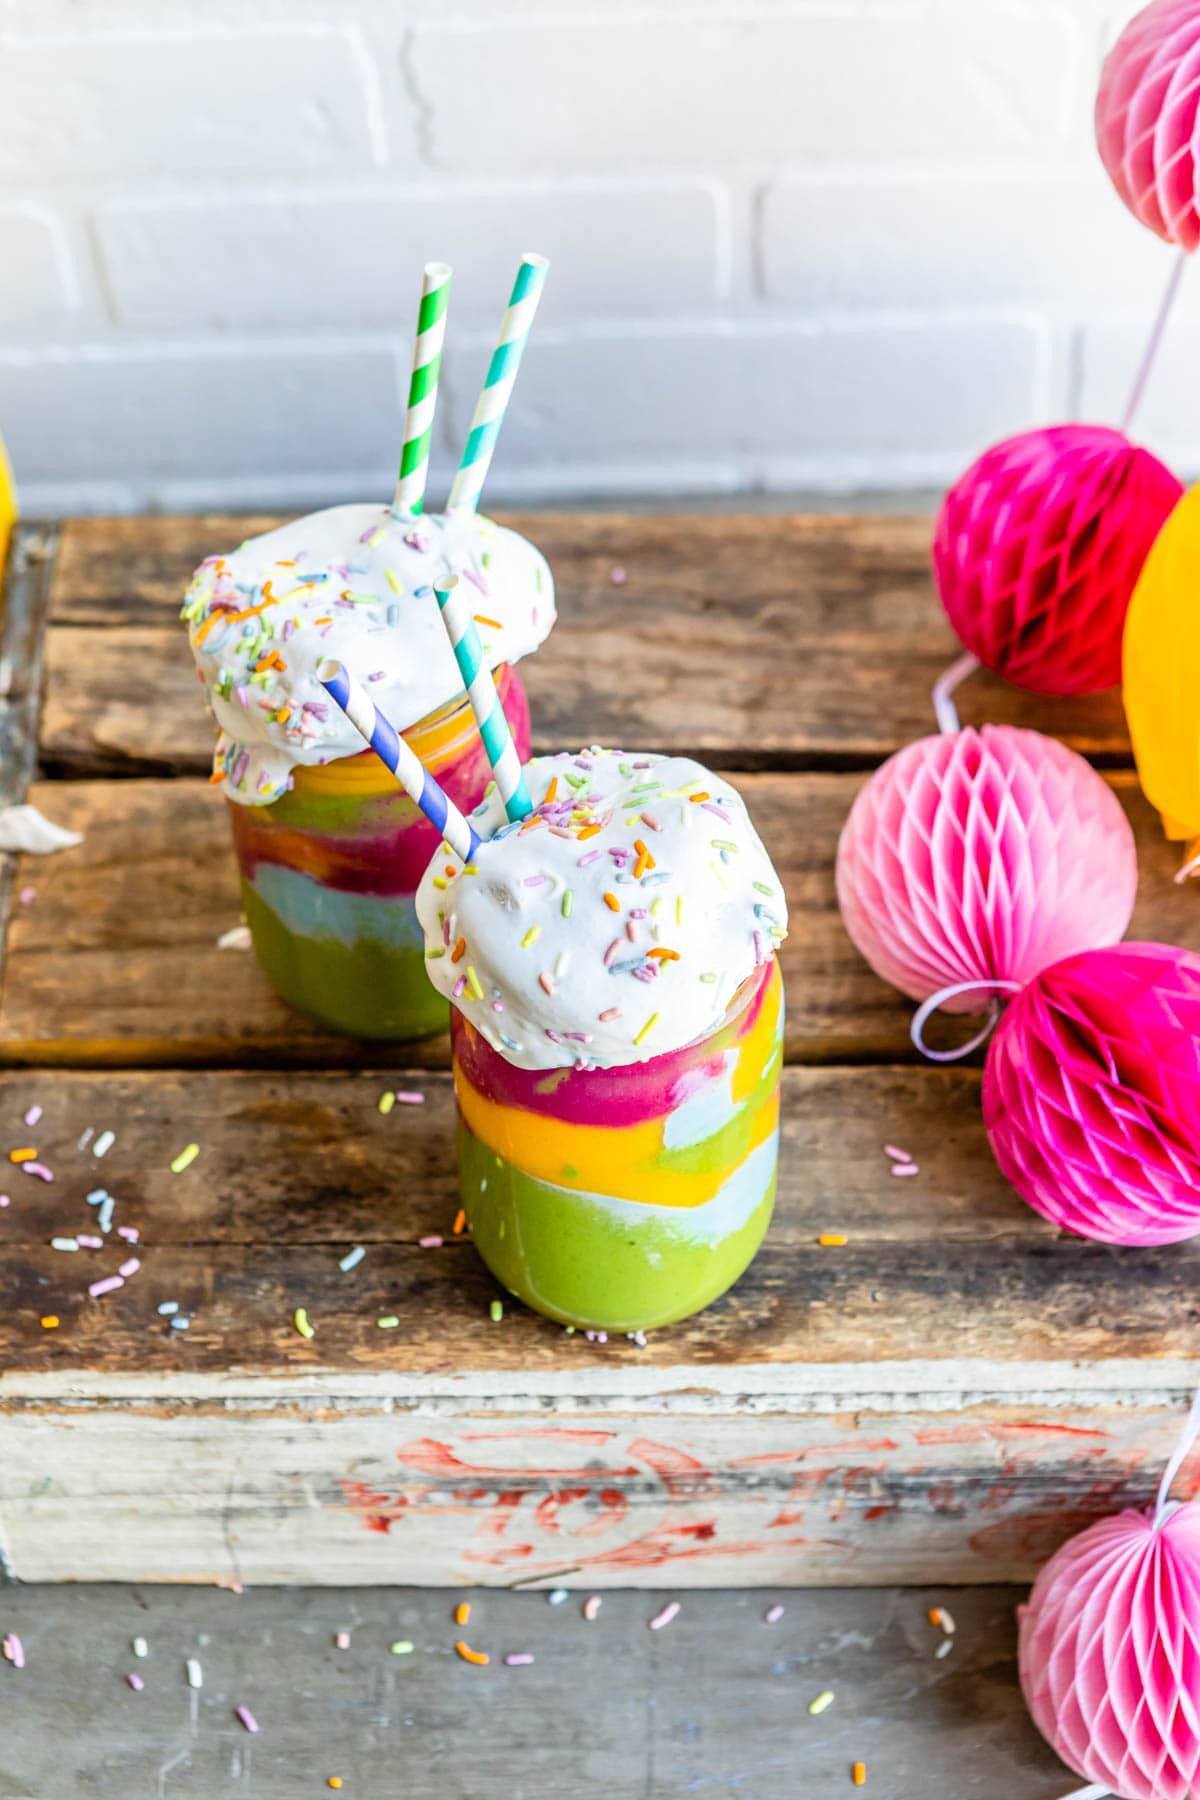 fun party dessert in a glass jars with sprinkles and coconut whipped cream on top as well as paper straws.